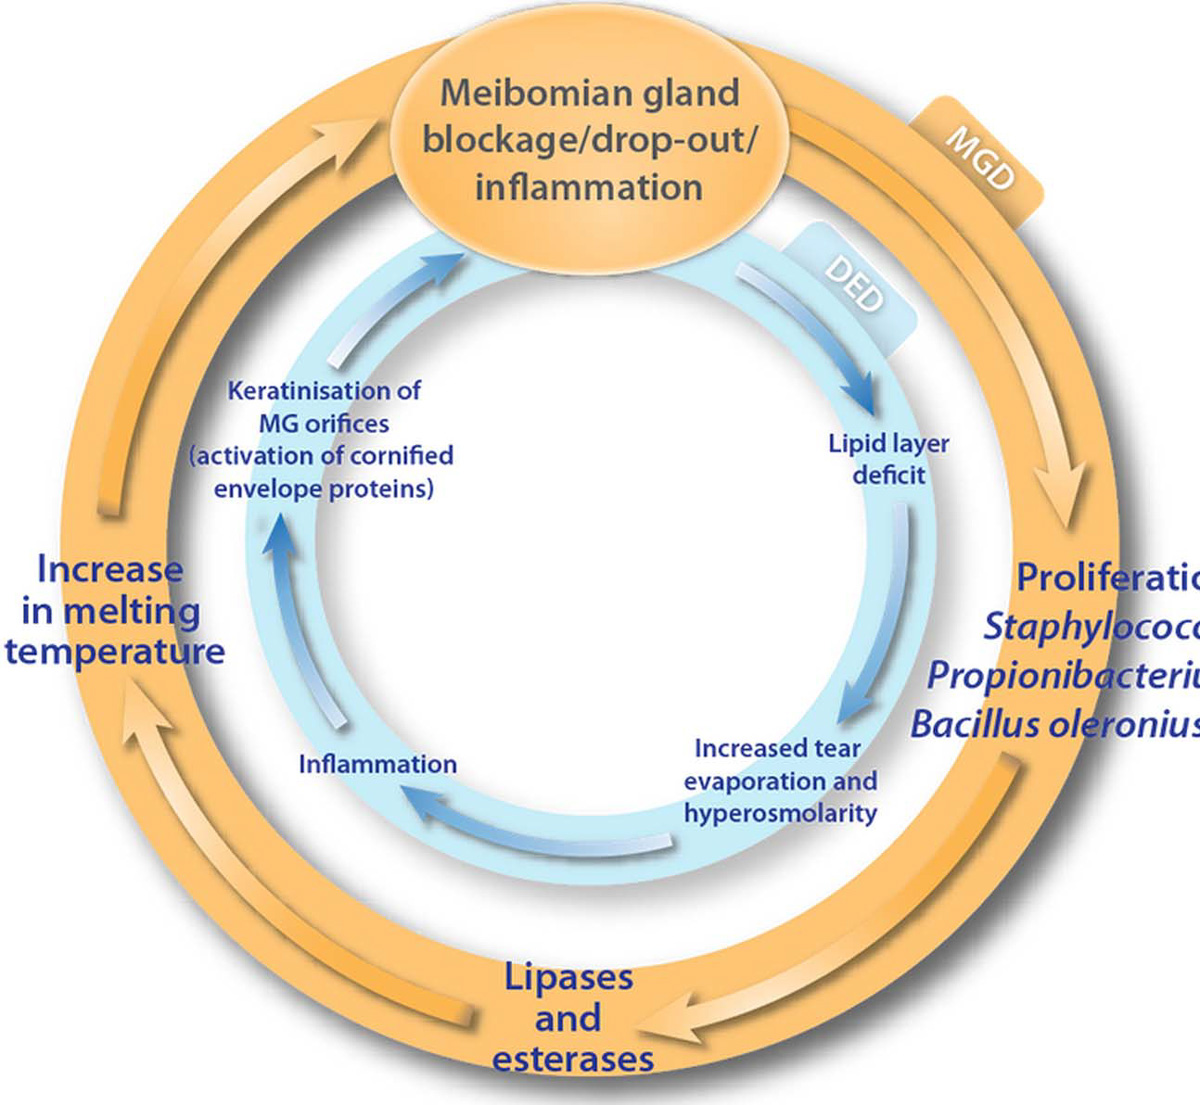 Revisiting the vicious circle of dry eye disease: a focus on the pathophysiology of meibomian gland dysfunction